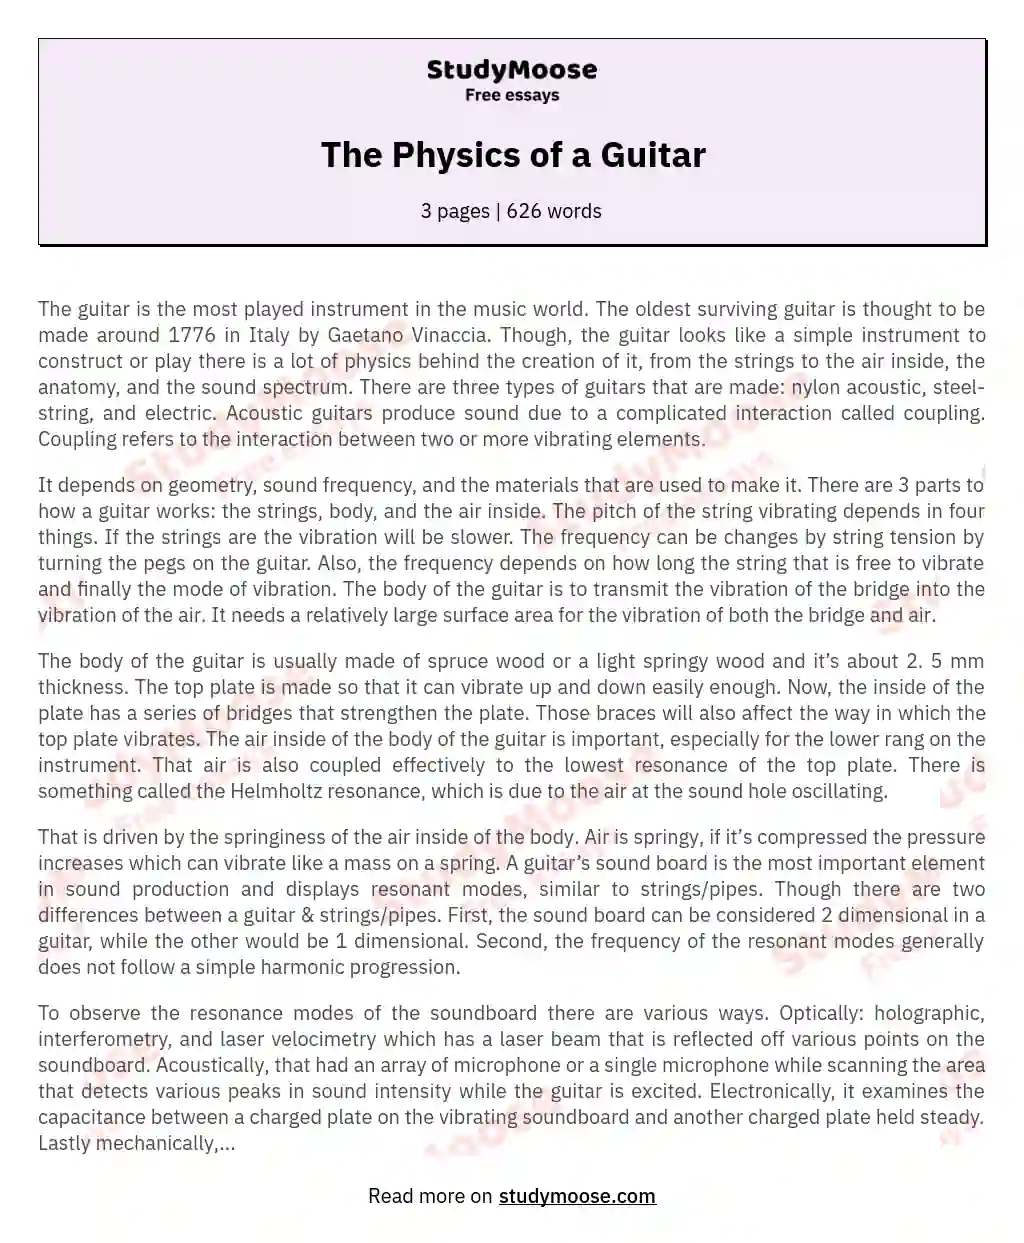 The Physics of a Guitar